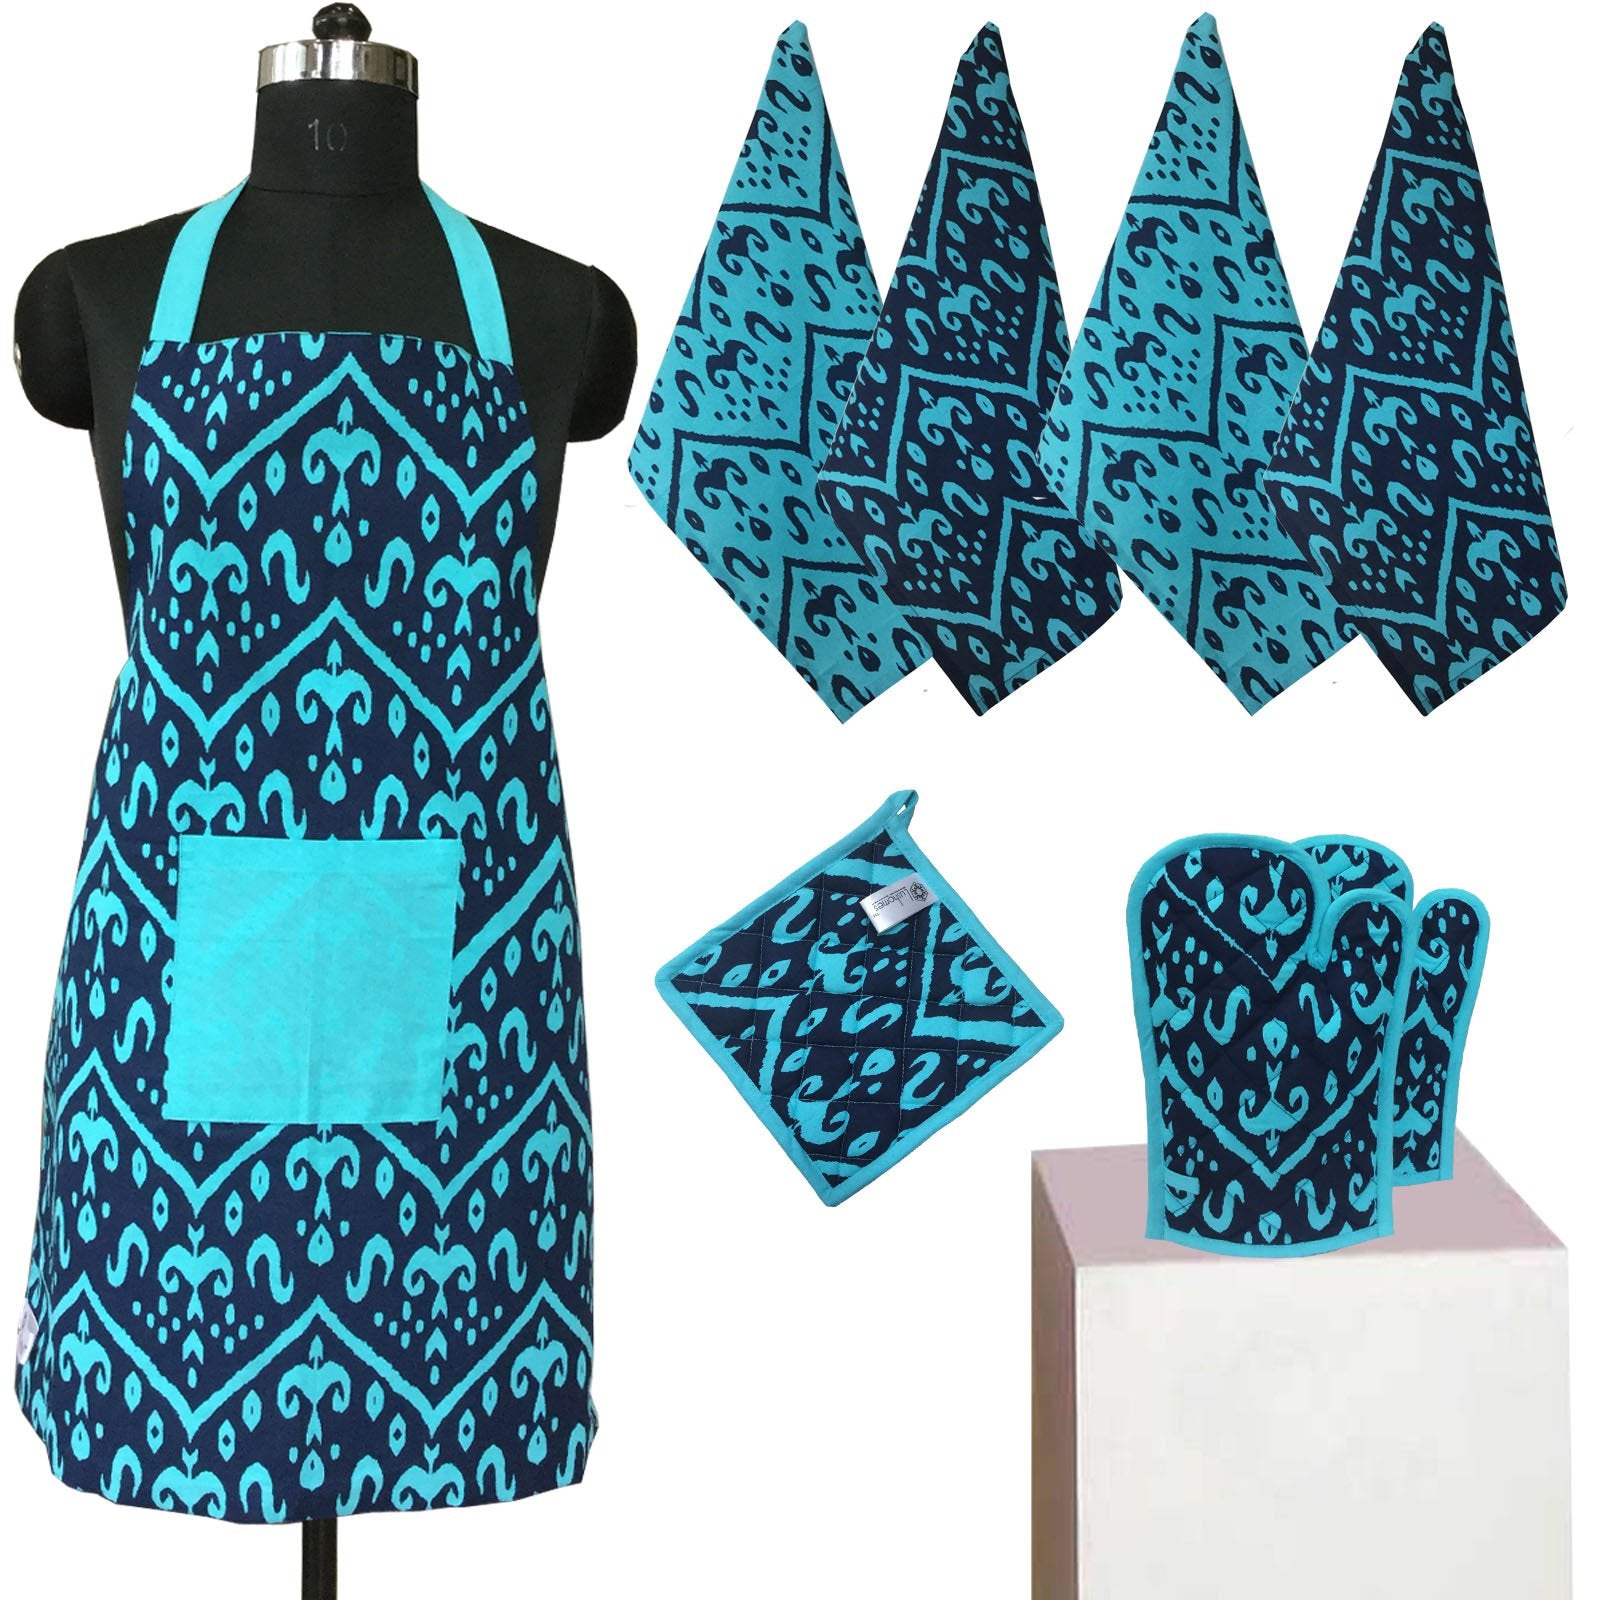 Lushomes Colorful Printed Frilly Apron Set ( 1 Apron, 4 Kitchen towels, 2 Oven Mittens, 1 Pot Holder)